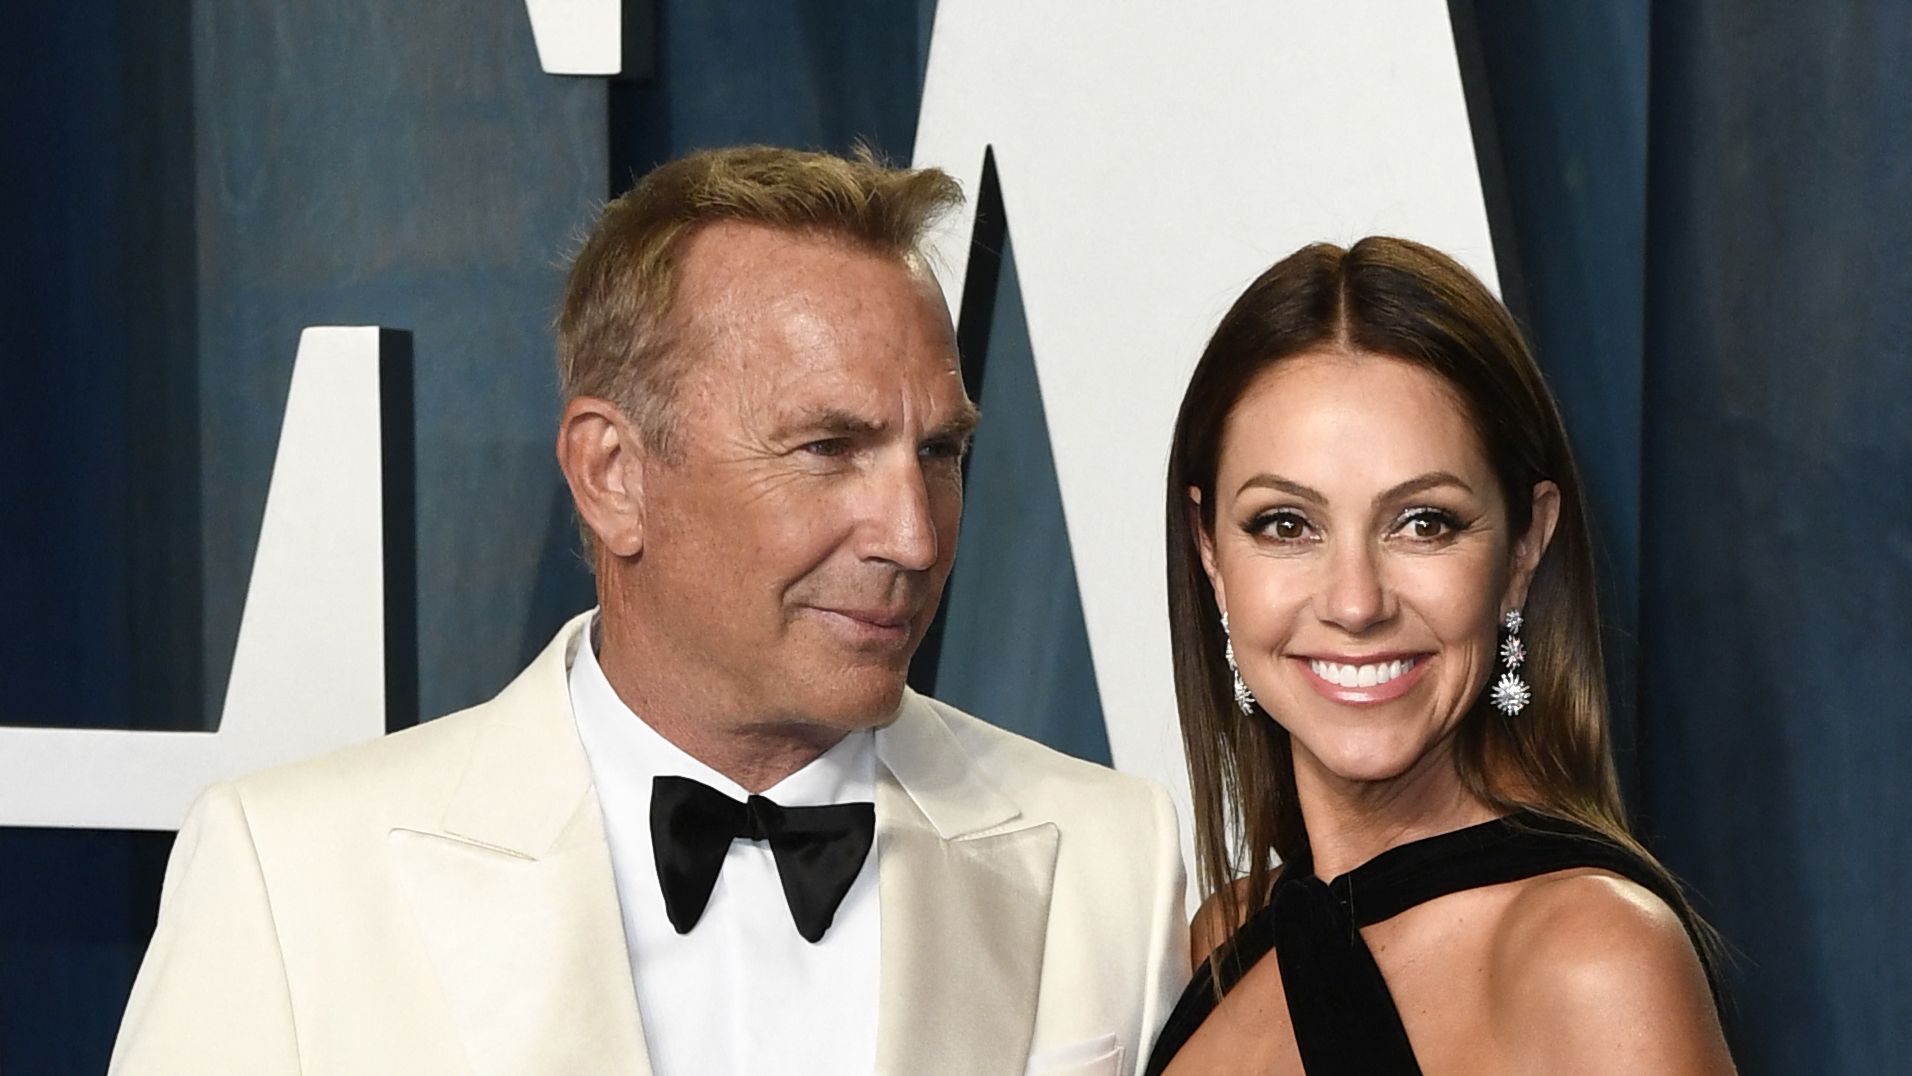 Kevin Costner's Tough Year: A Look at His Divorce Drama and Lifeline Friendships